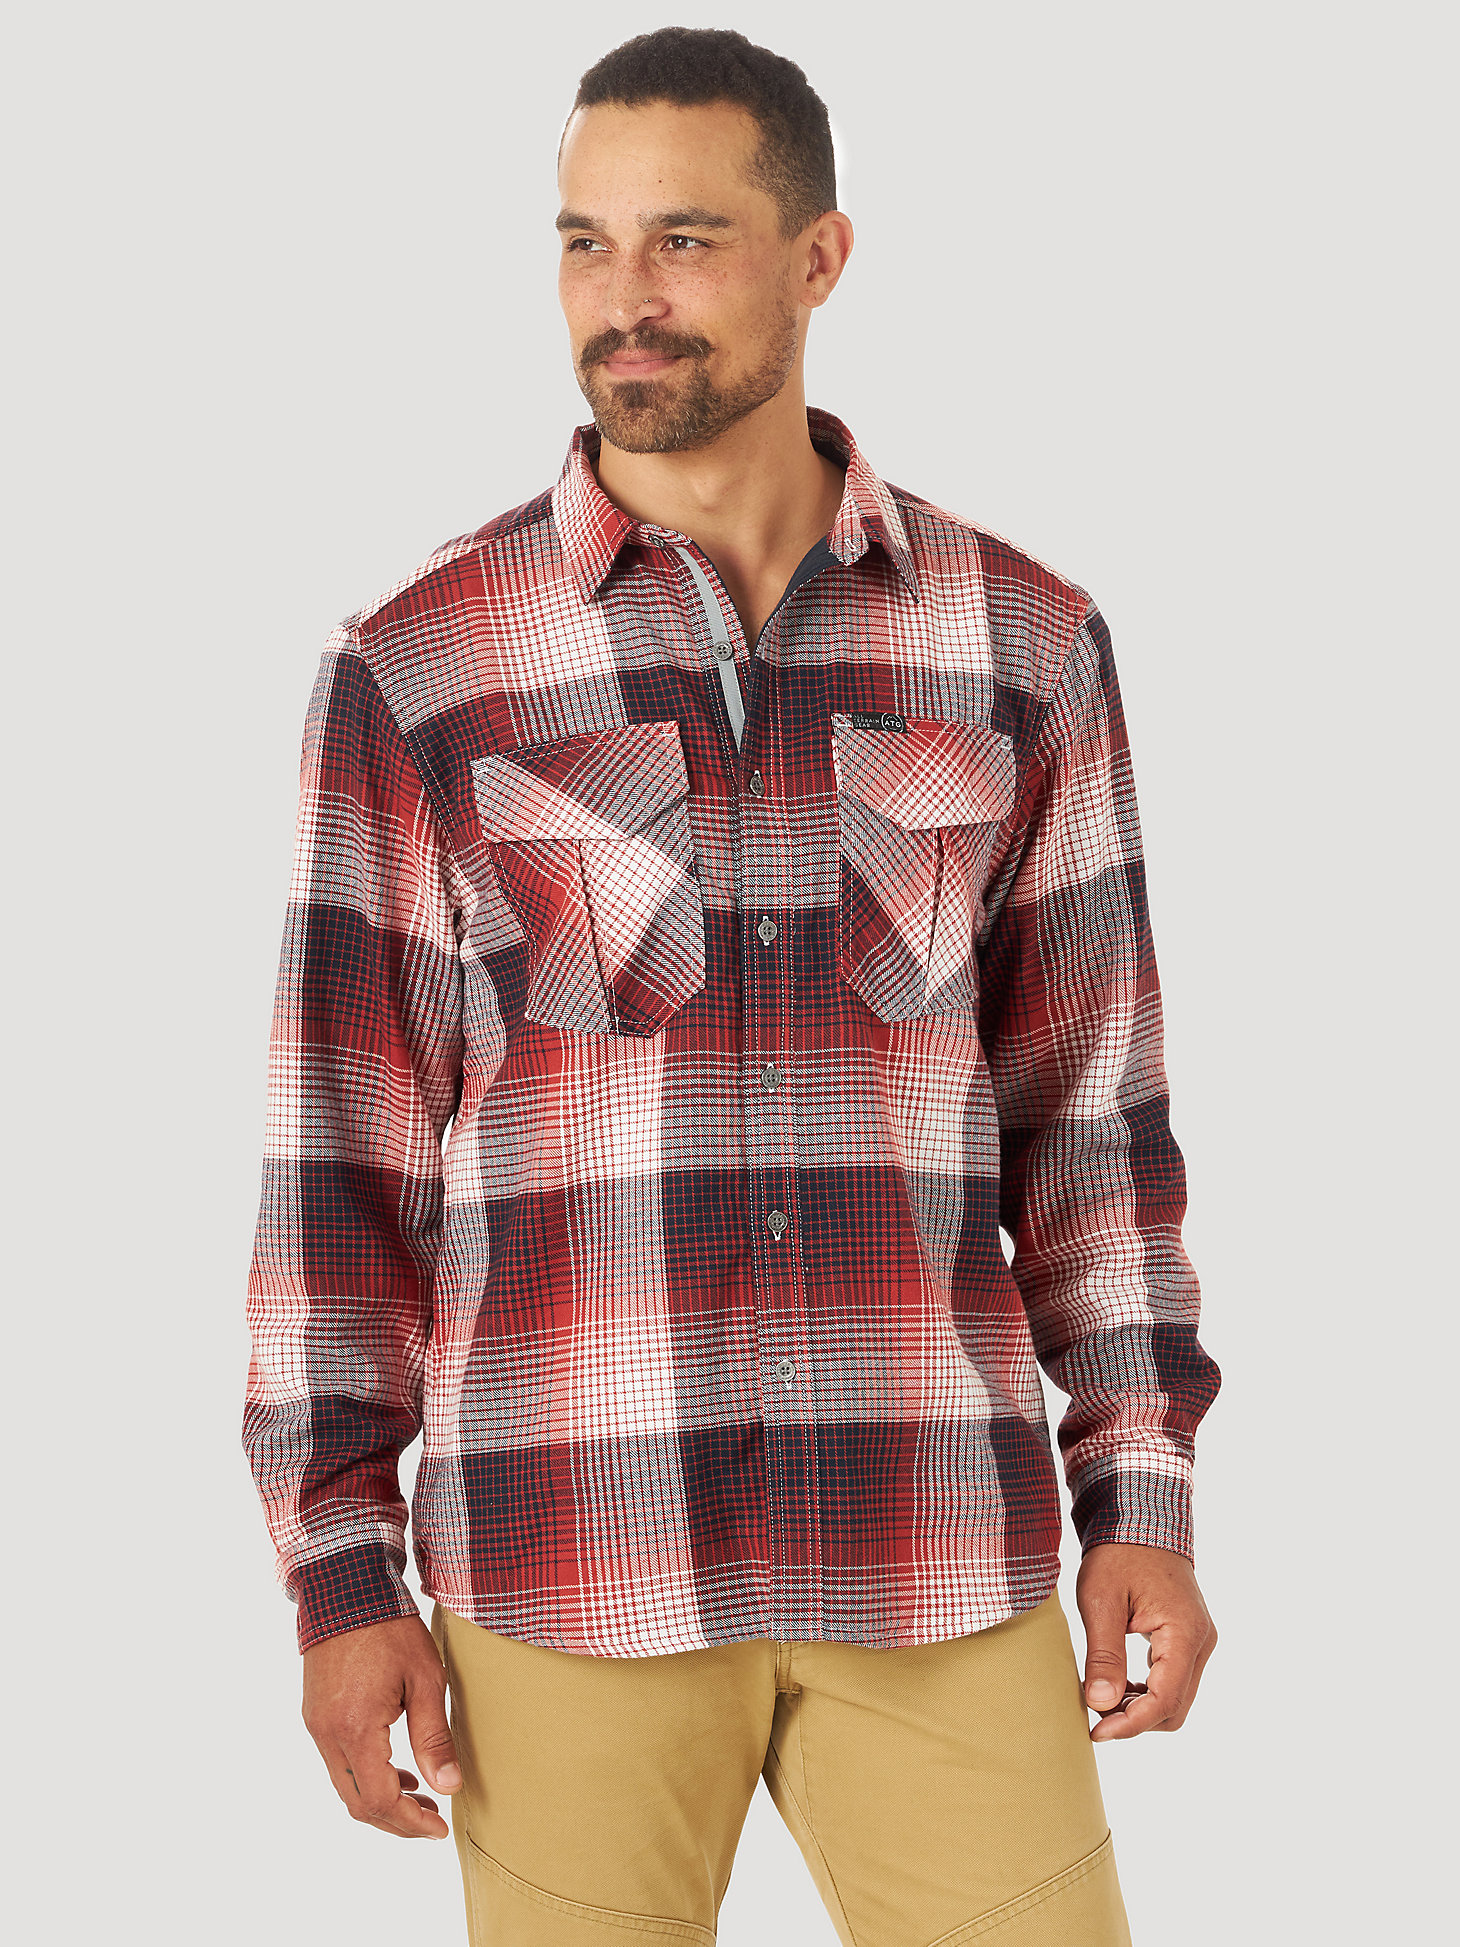 ATG by Wrangler™ Men's Thermal Lined Flannel Shirt in Dark Red main view